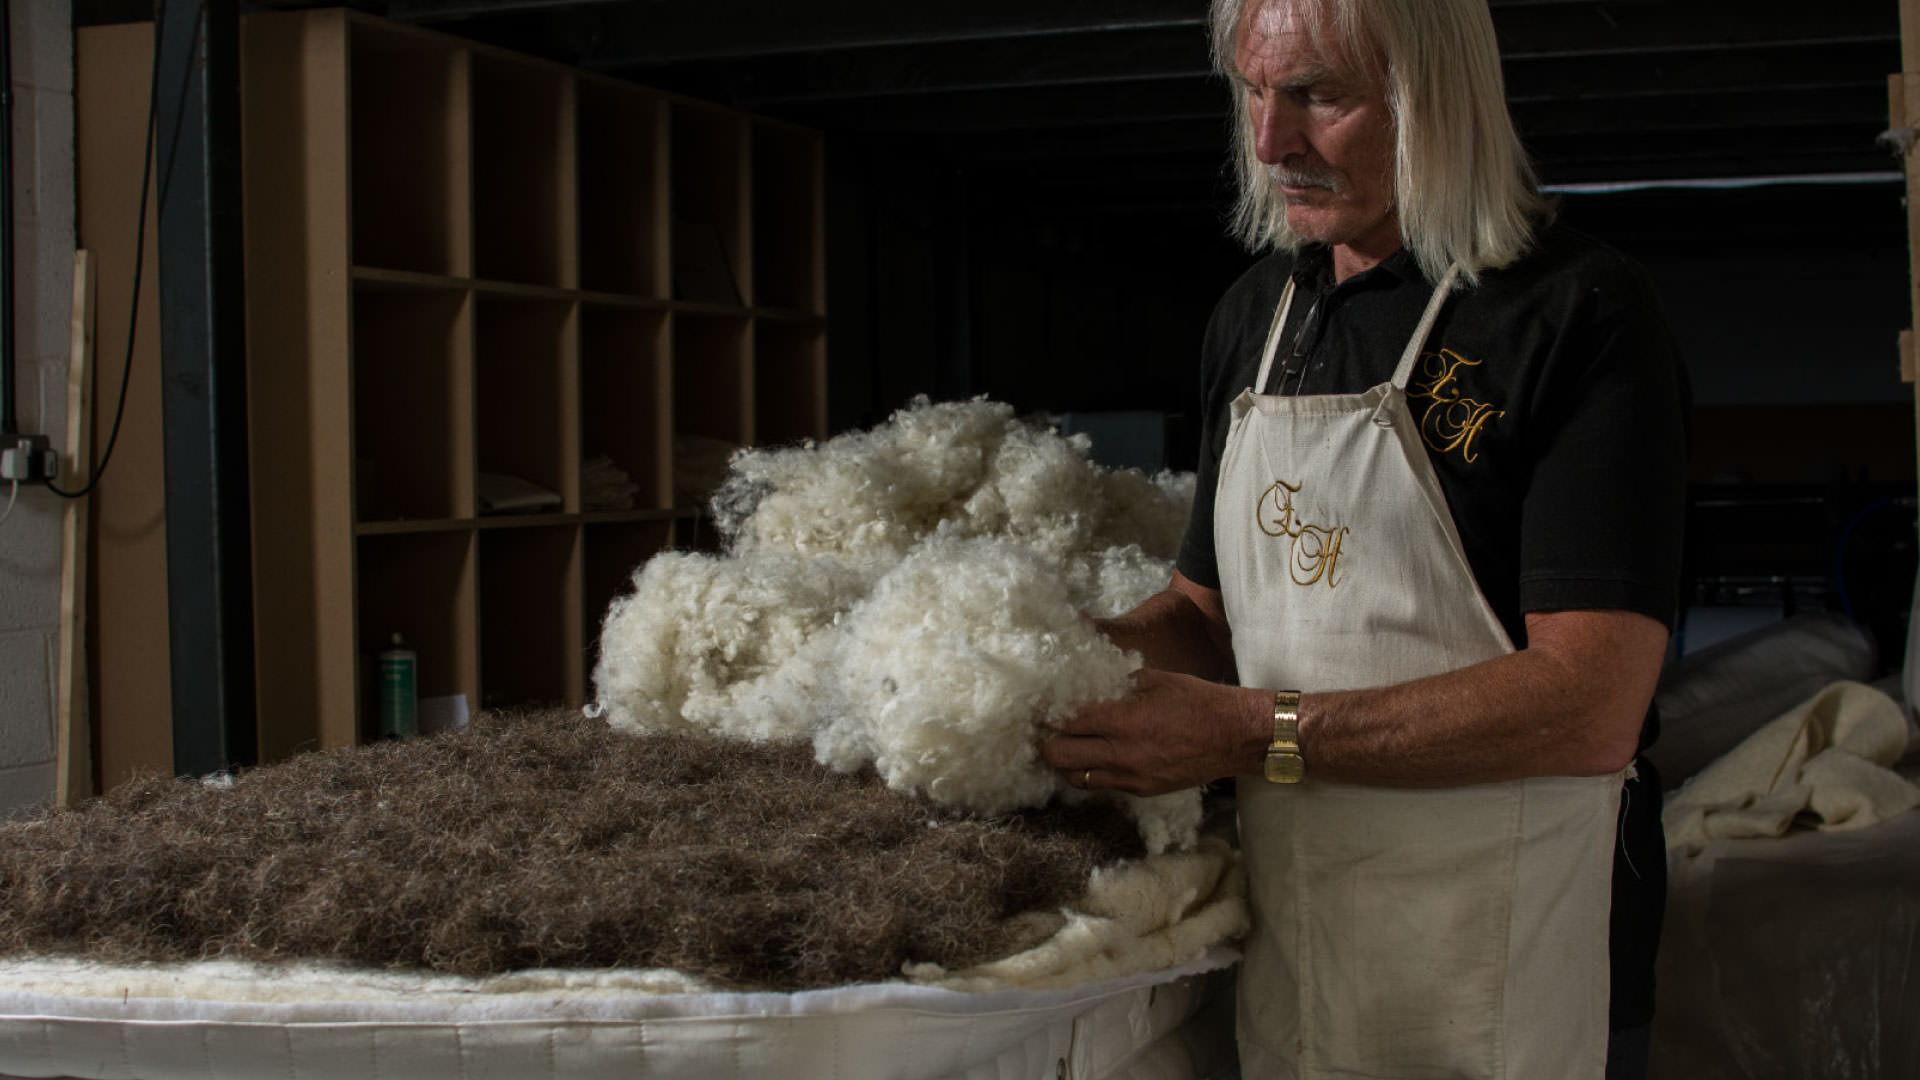 Adding-Wool-To-The-Mattress-By-Hand